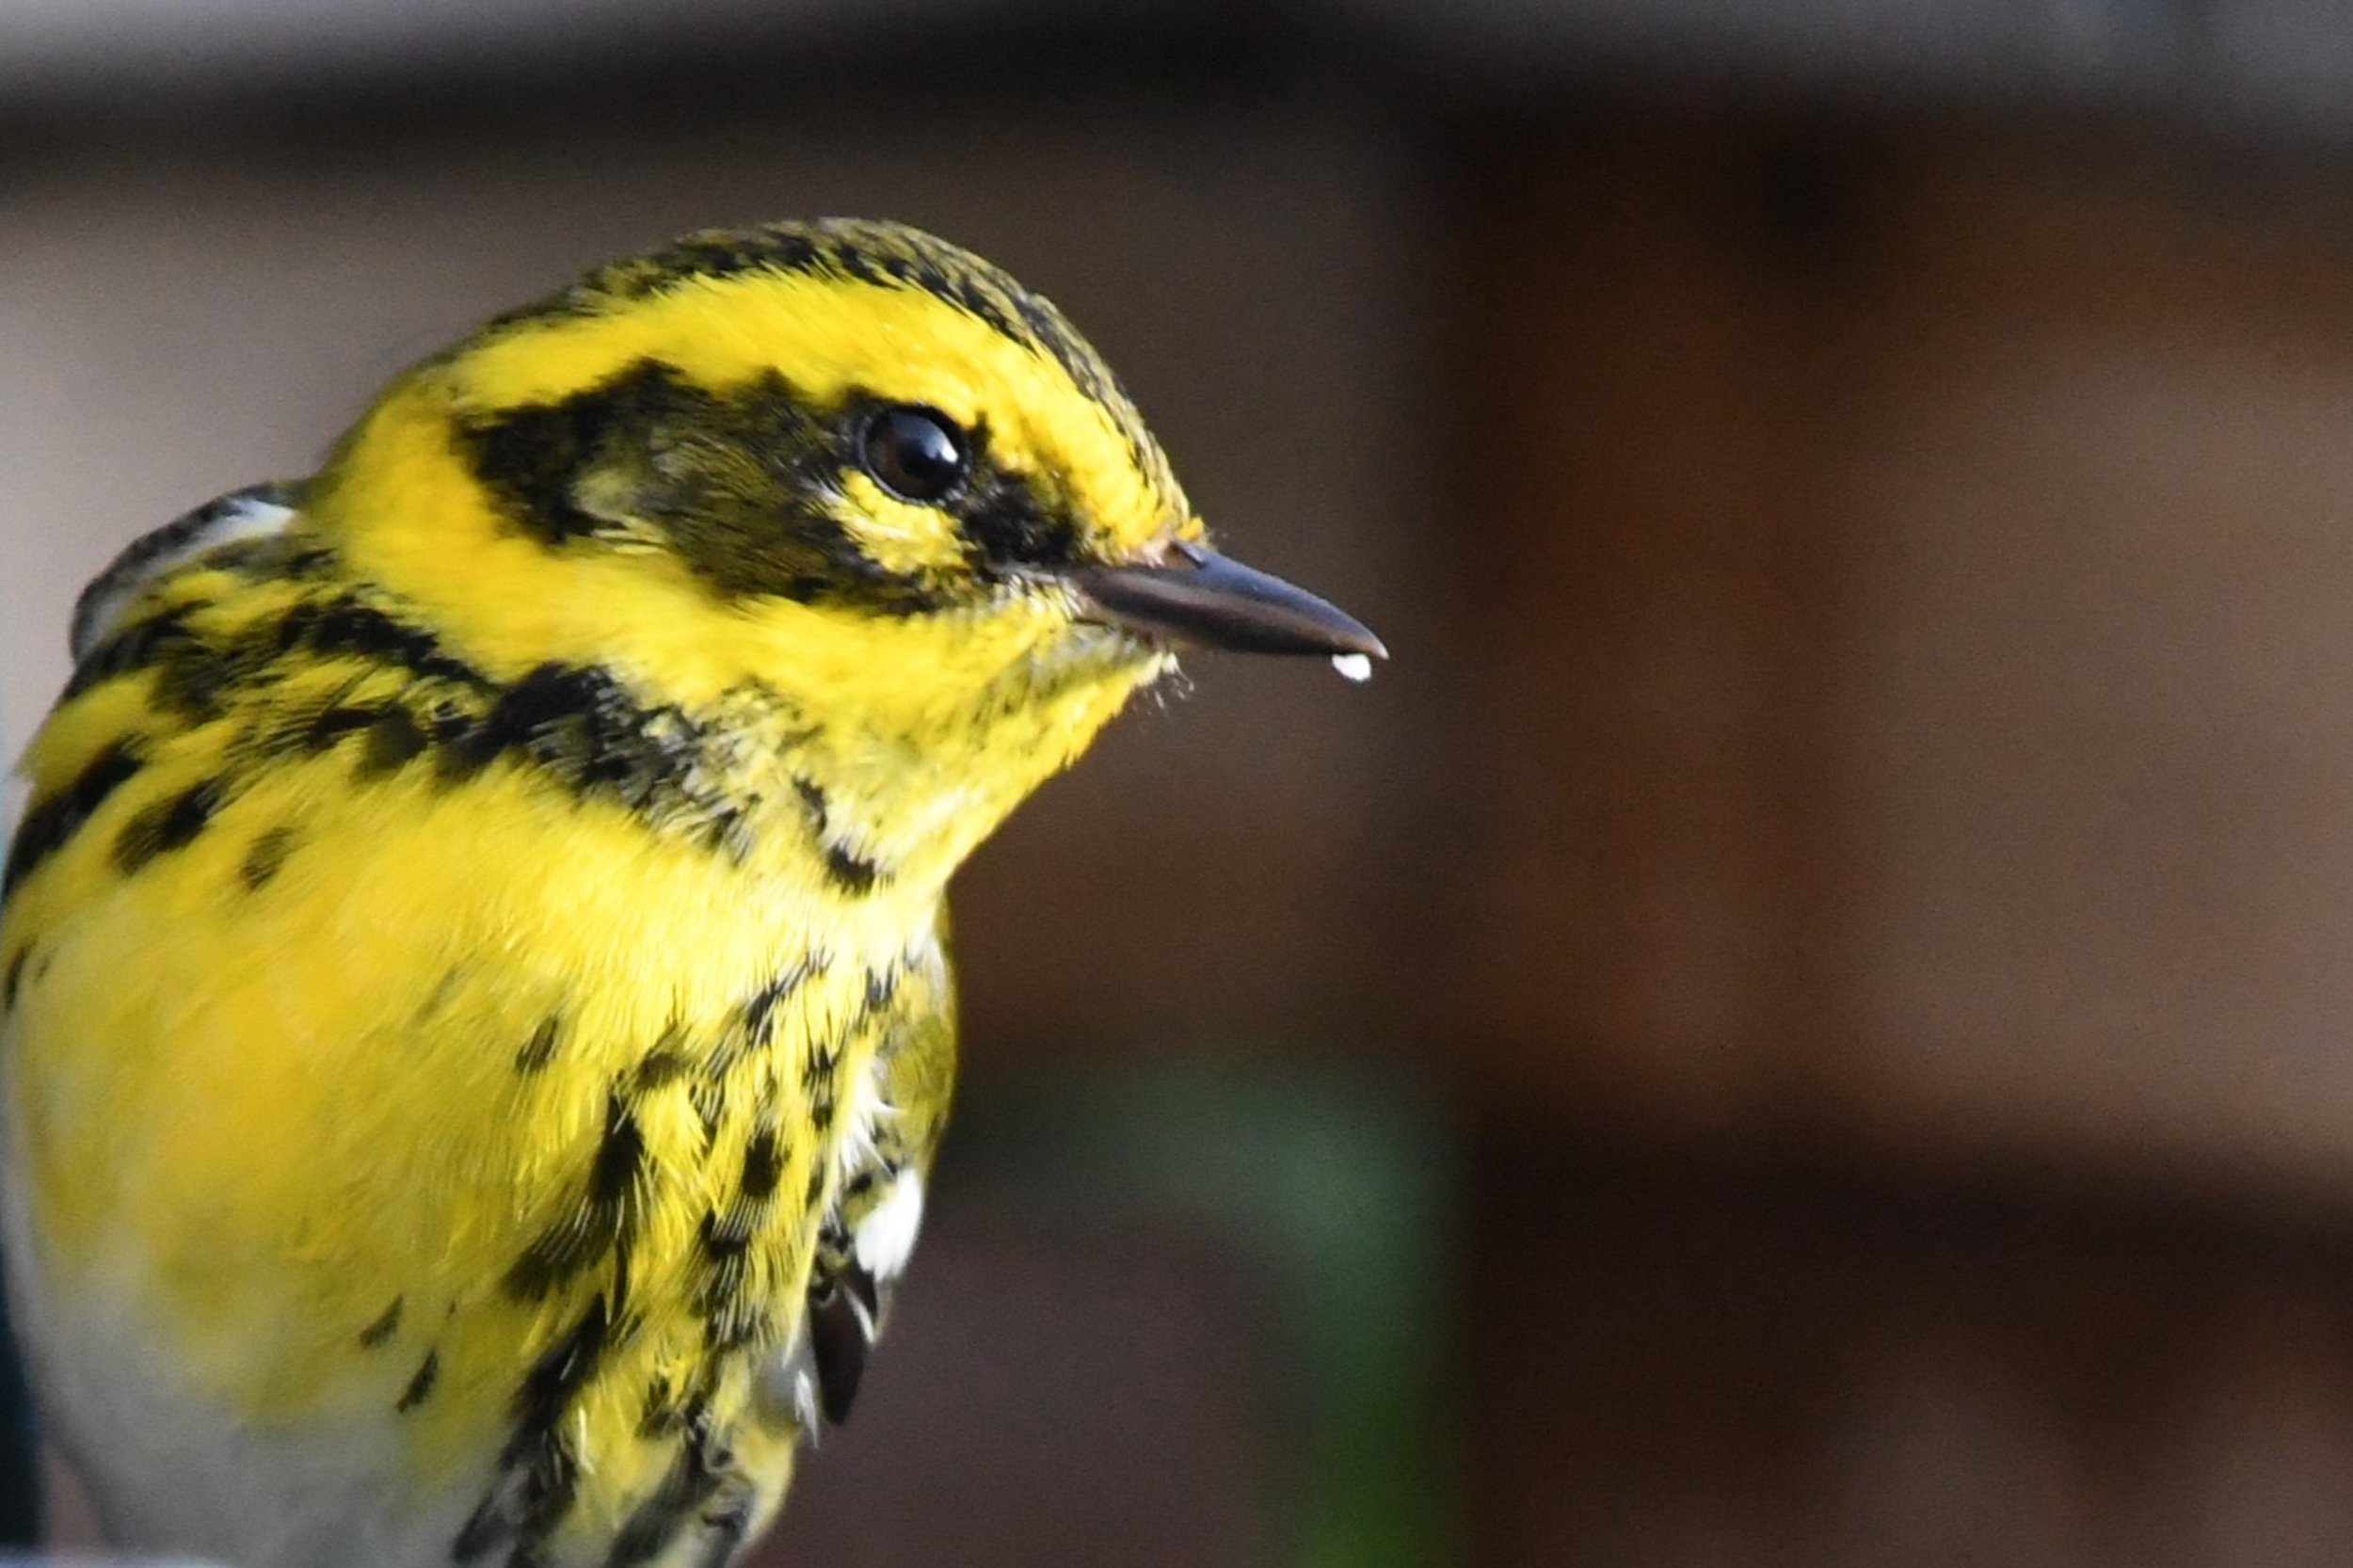 Townsend's Warbler closeup by Ruth Shelly.JPG